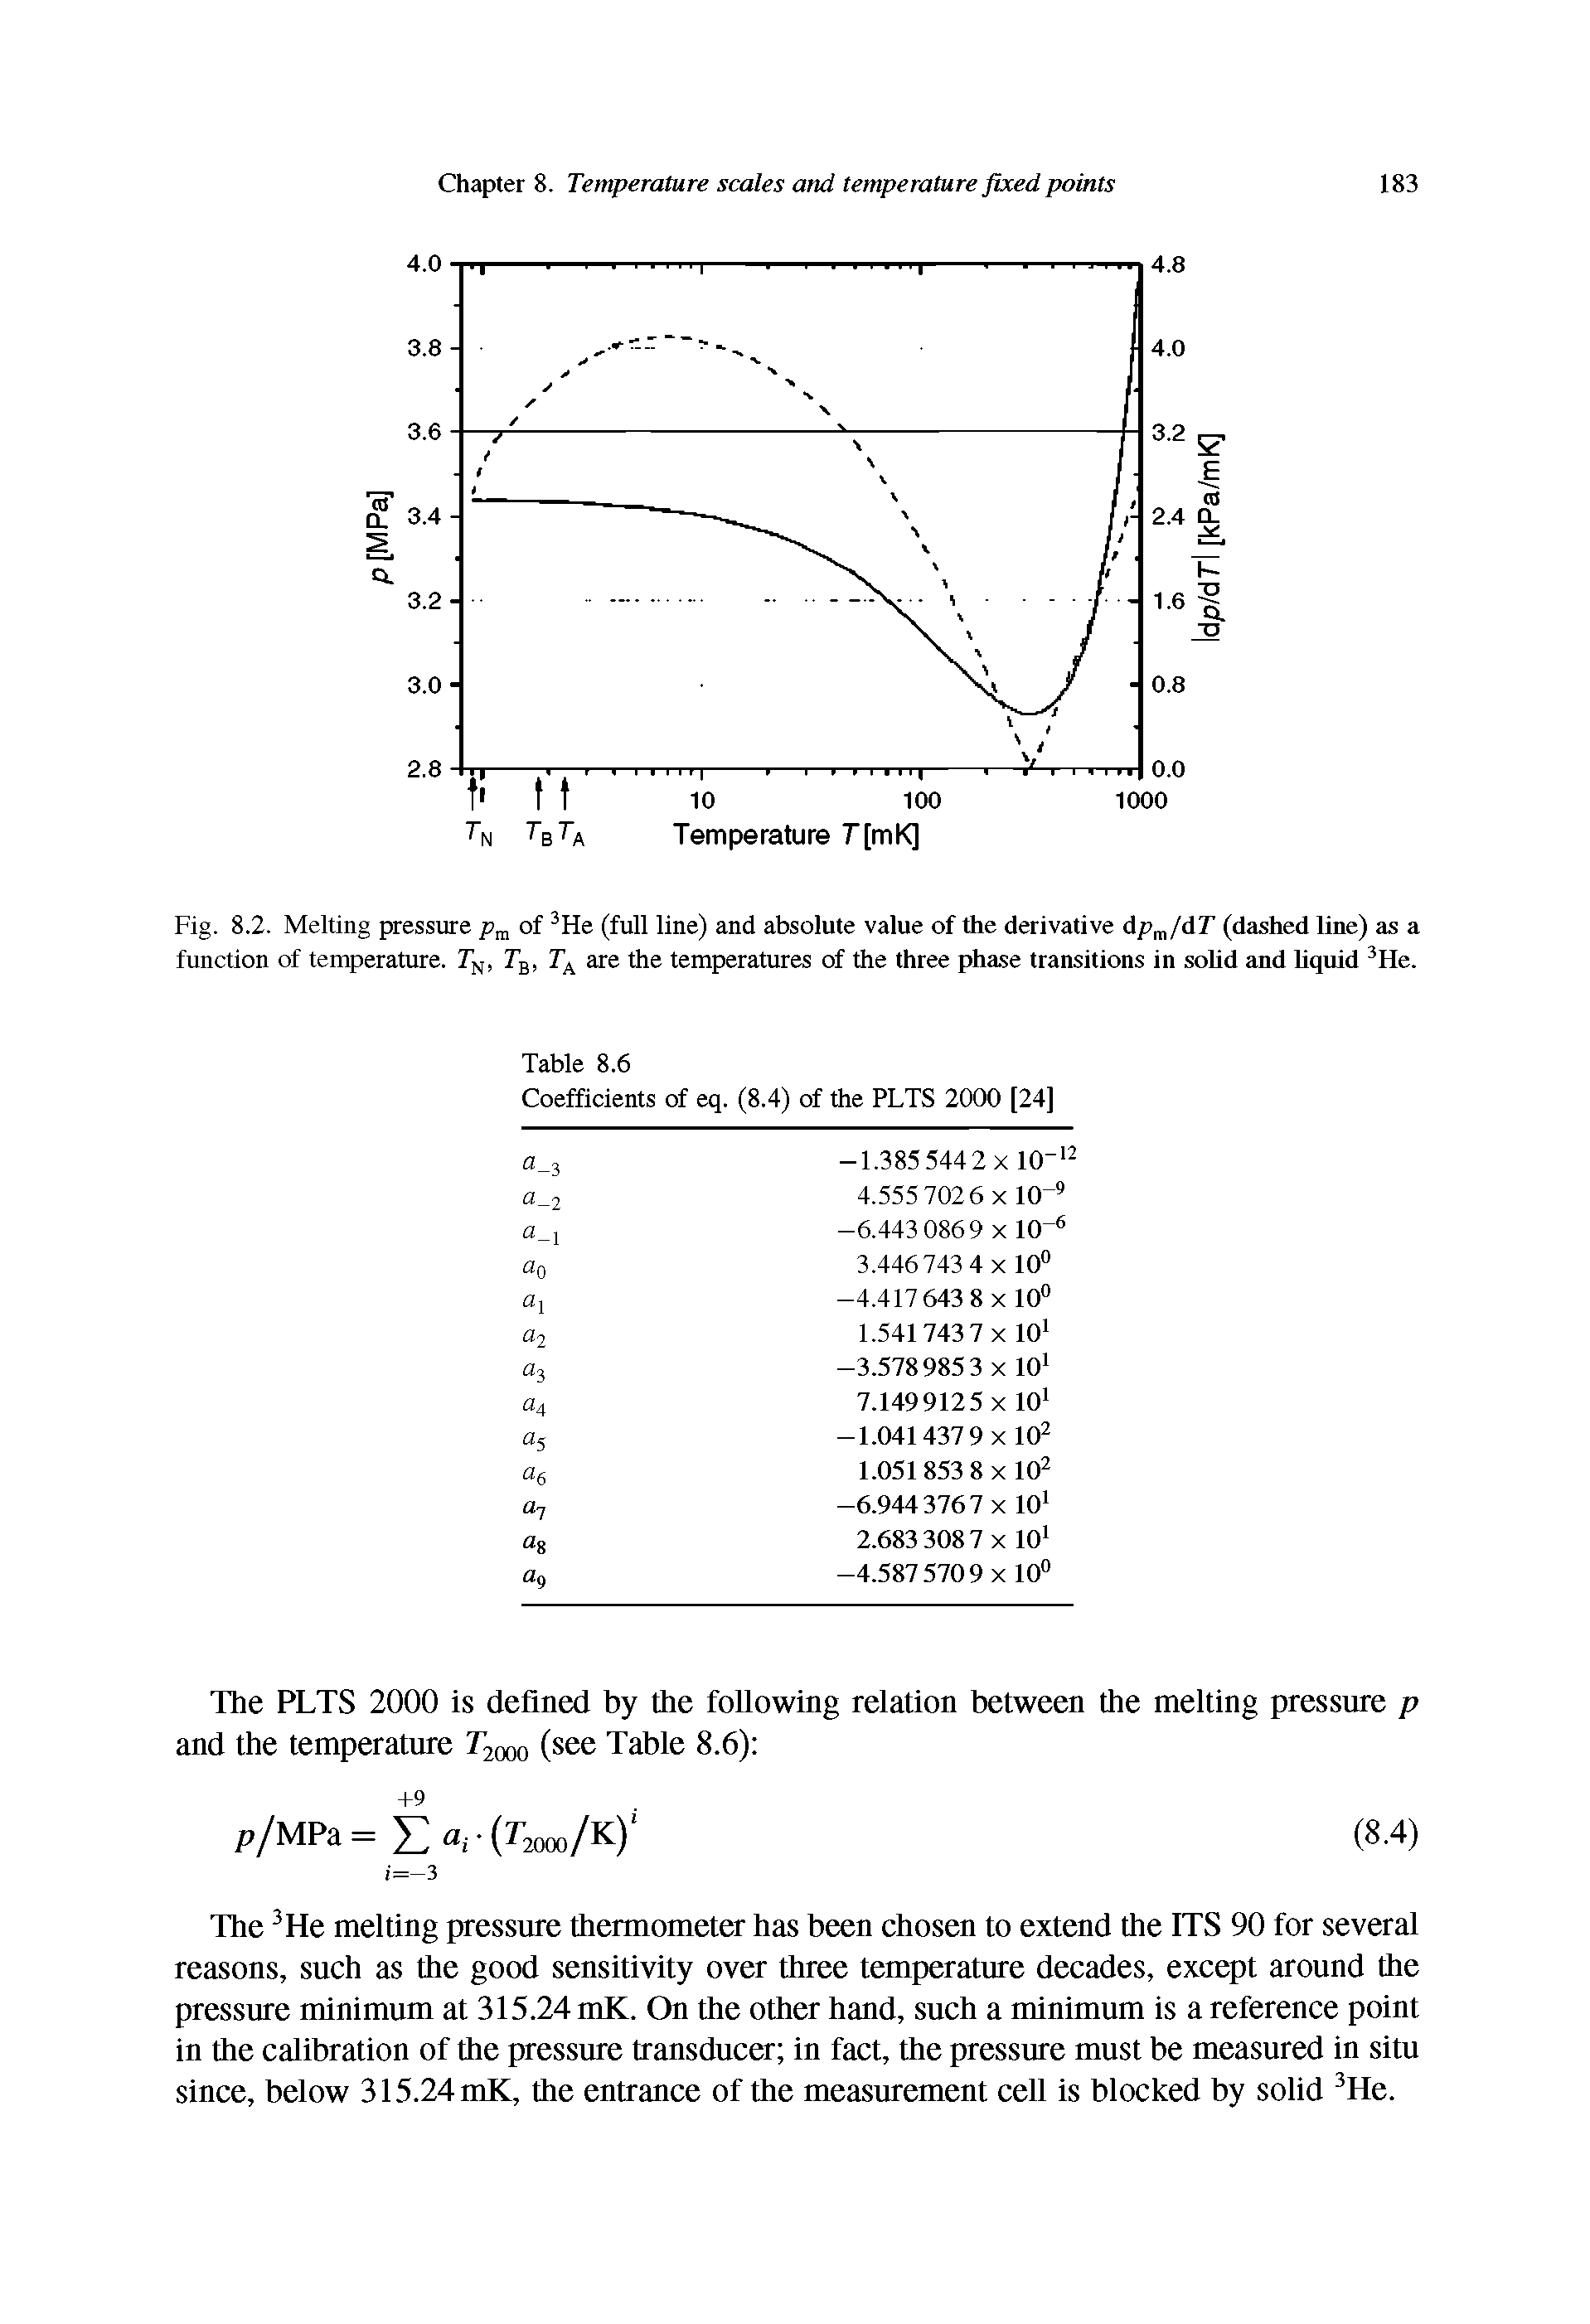 Fig. 8.2. Melting pressure pm of 3He (full line) and absolute value of the derivative dpm/dr (dashed line) as a function of temperature. rN, TB, TA are the temperatures of the three phase transitions in solid and liquid 3He.